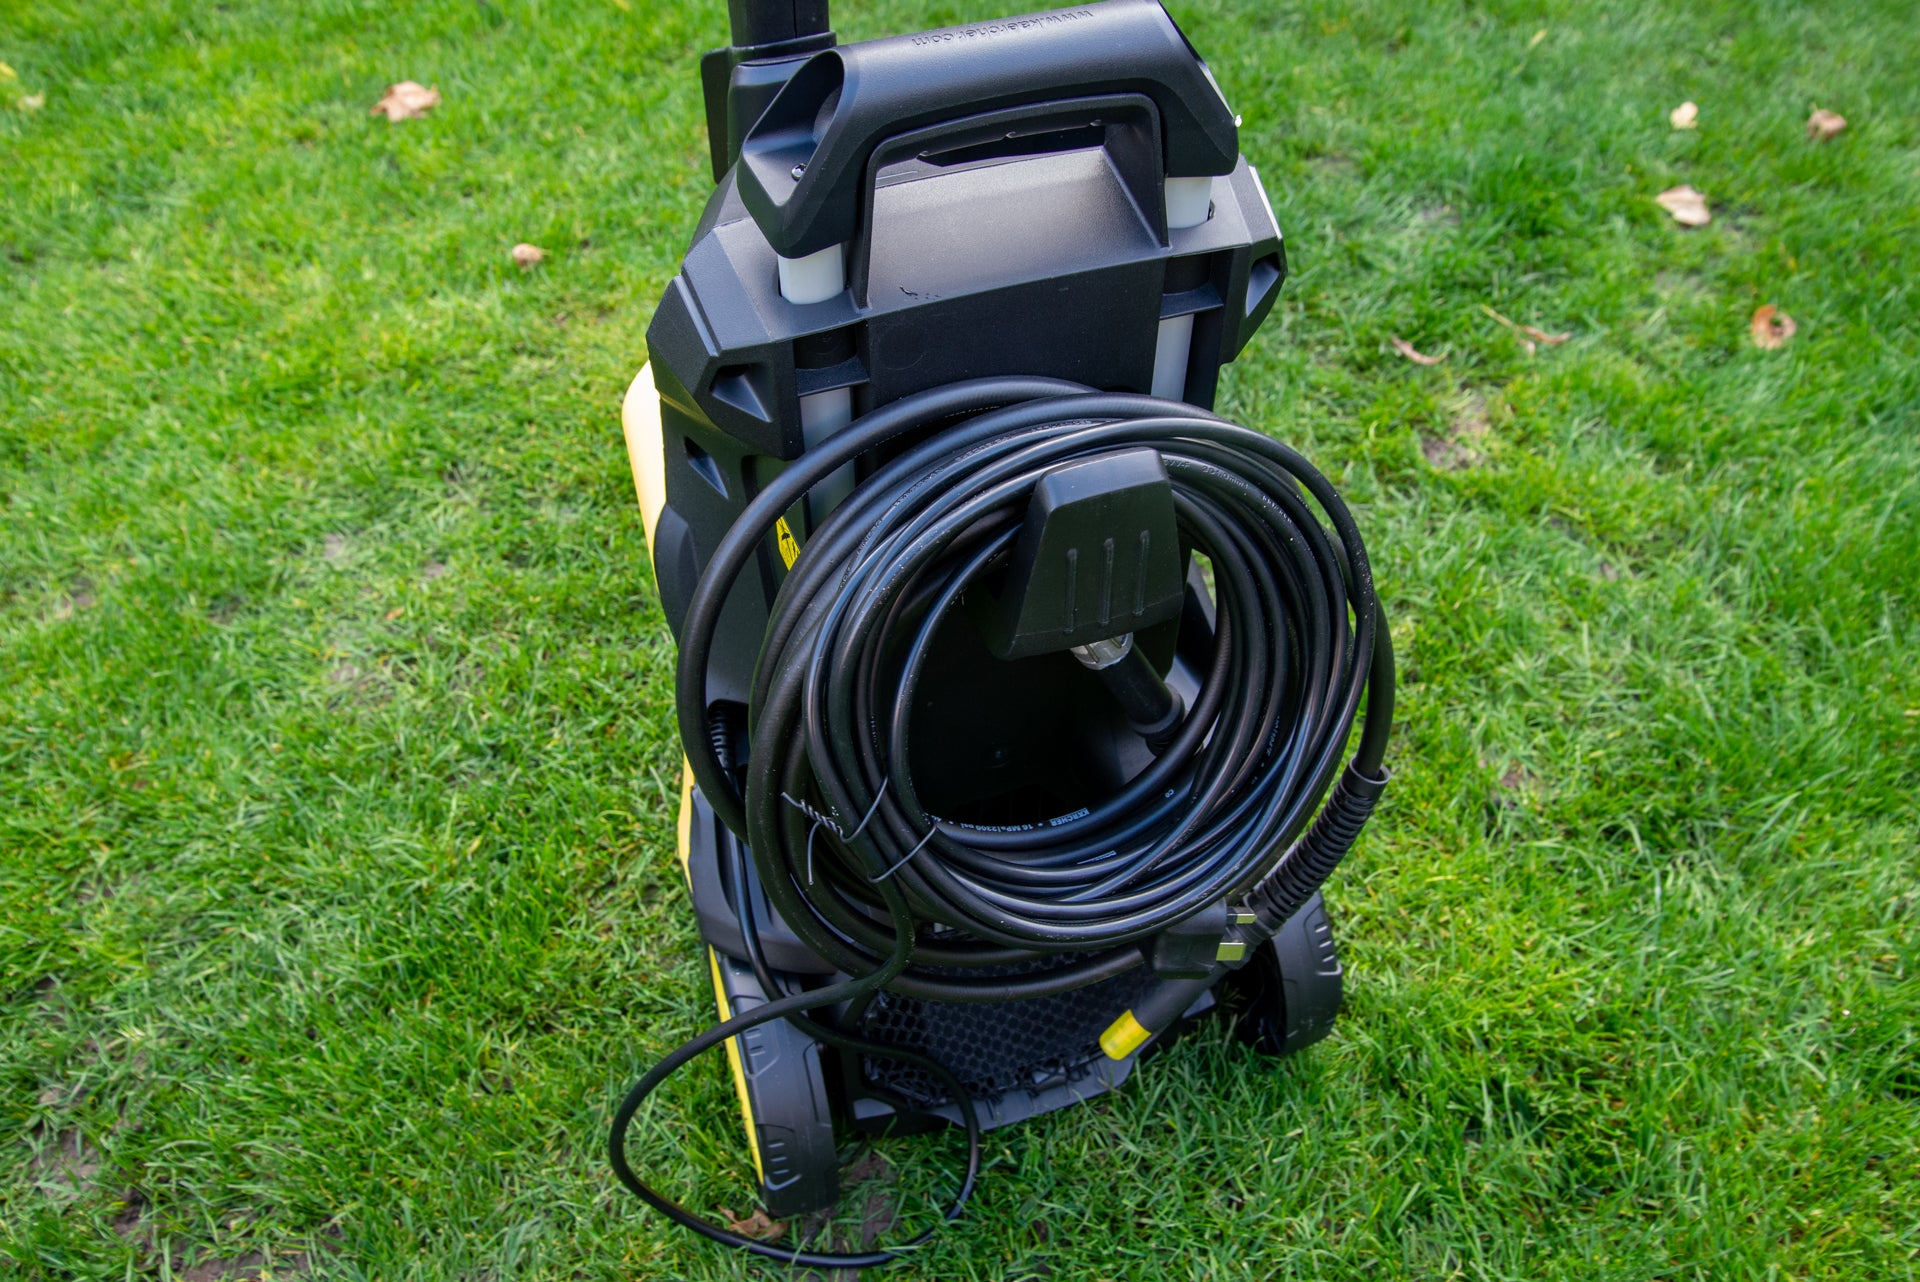 Karcher K5 Full Control Plus hose and power storage